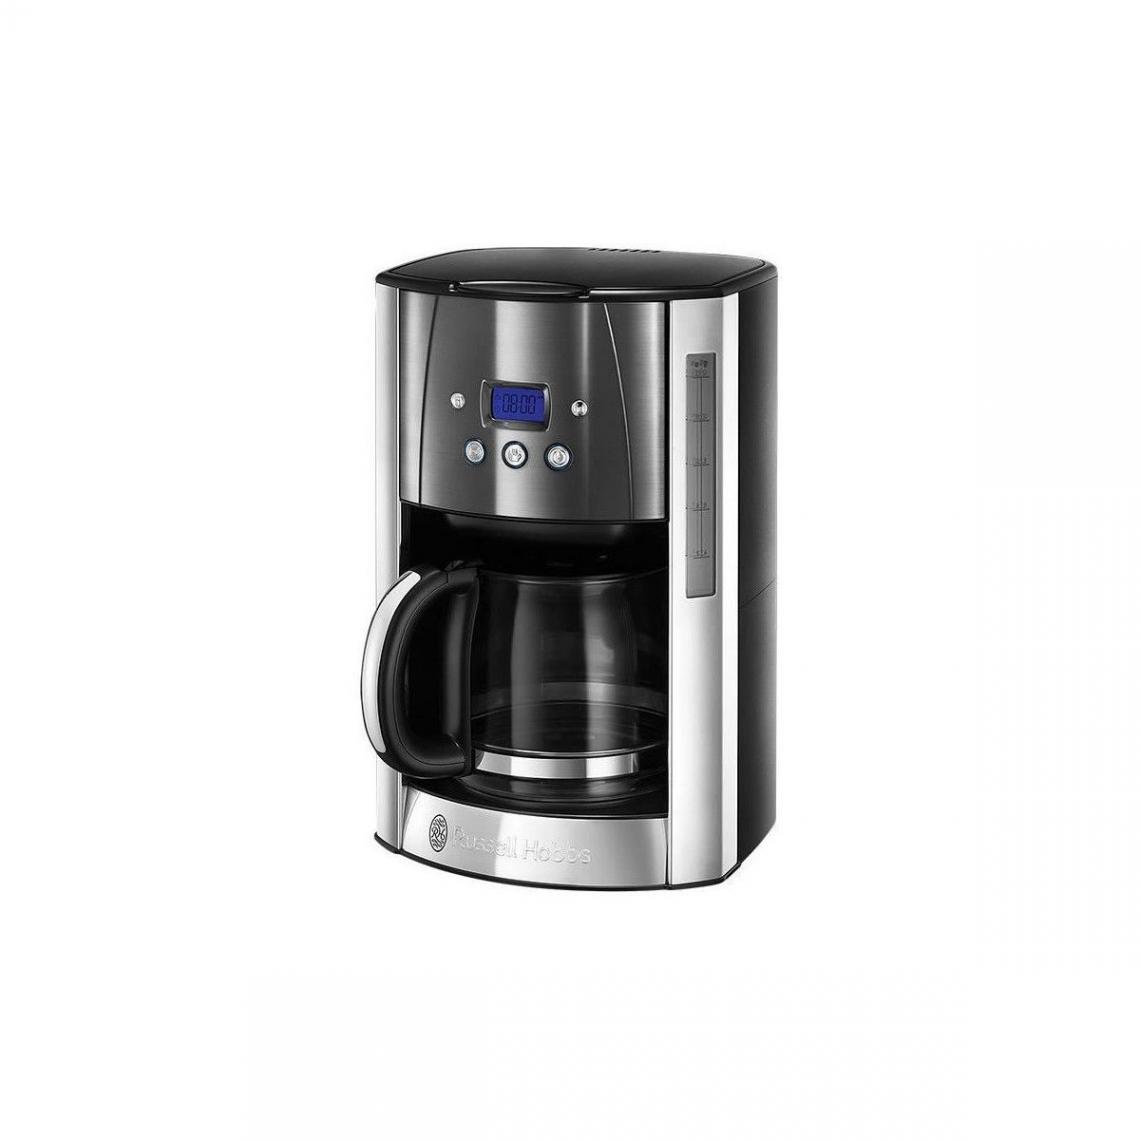 Russell Hobbs - RUSSELL HOBBS 23241-56 Cafetiere Filtre Luna 1.8L Inox, 12 Tasses, Programmable, Auto-Nettoyante - Gris - Expresso - Cafetière